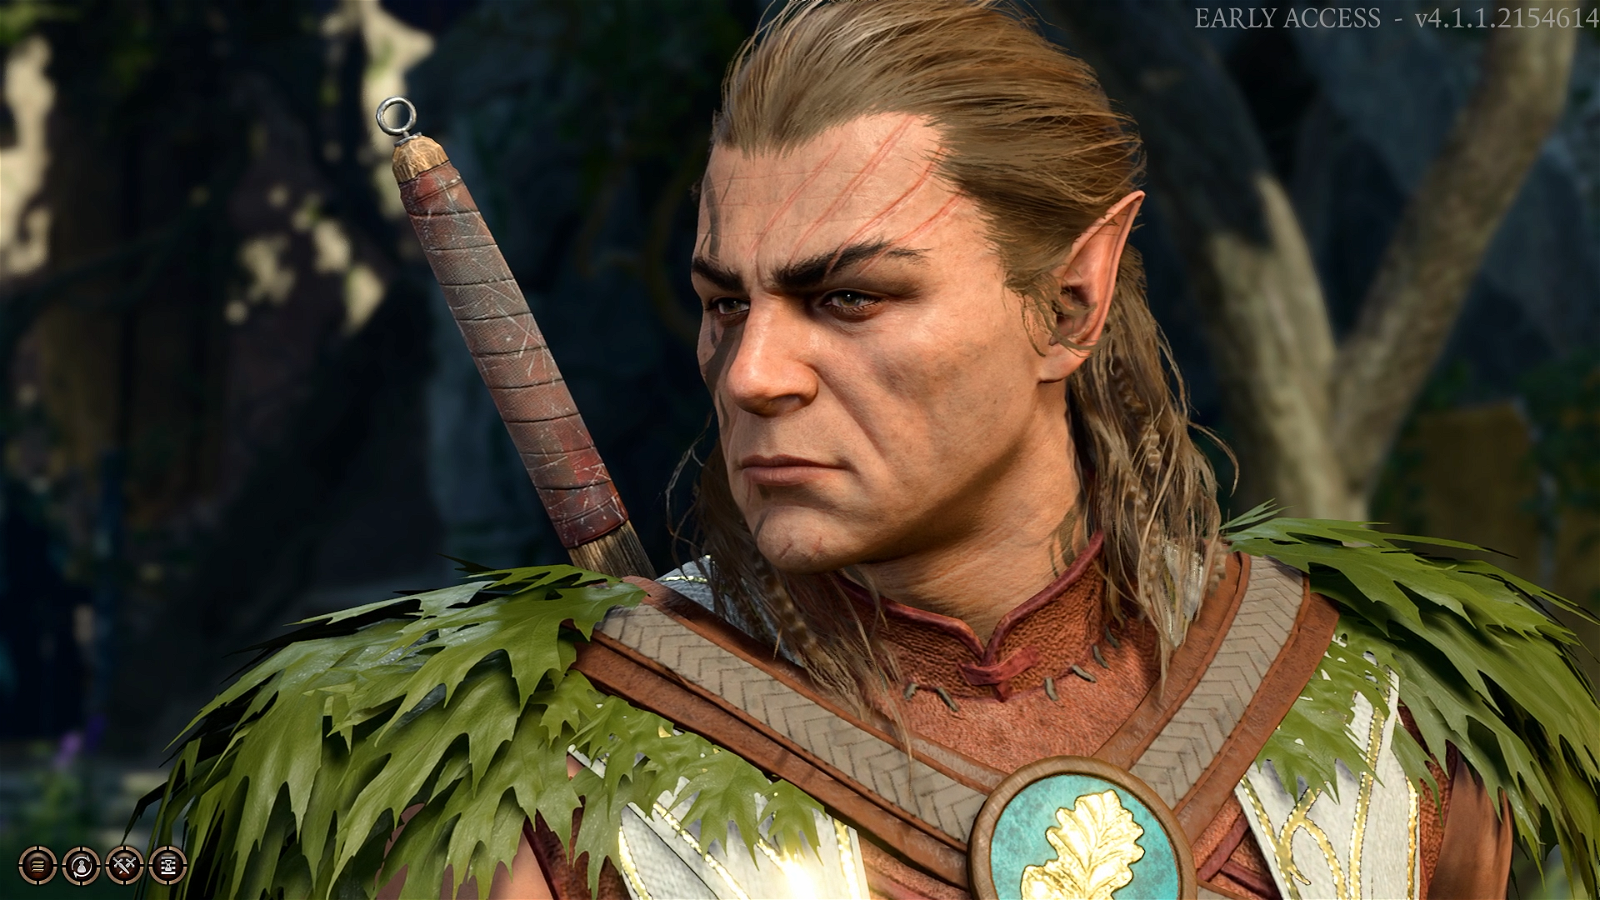 Halsin is a Wood Elf Druid in Baldur's Gate 3 known for his strong dexterity and wisdom